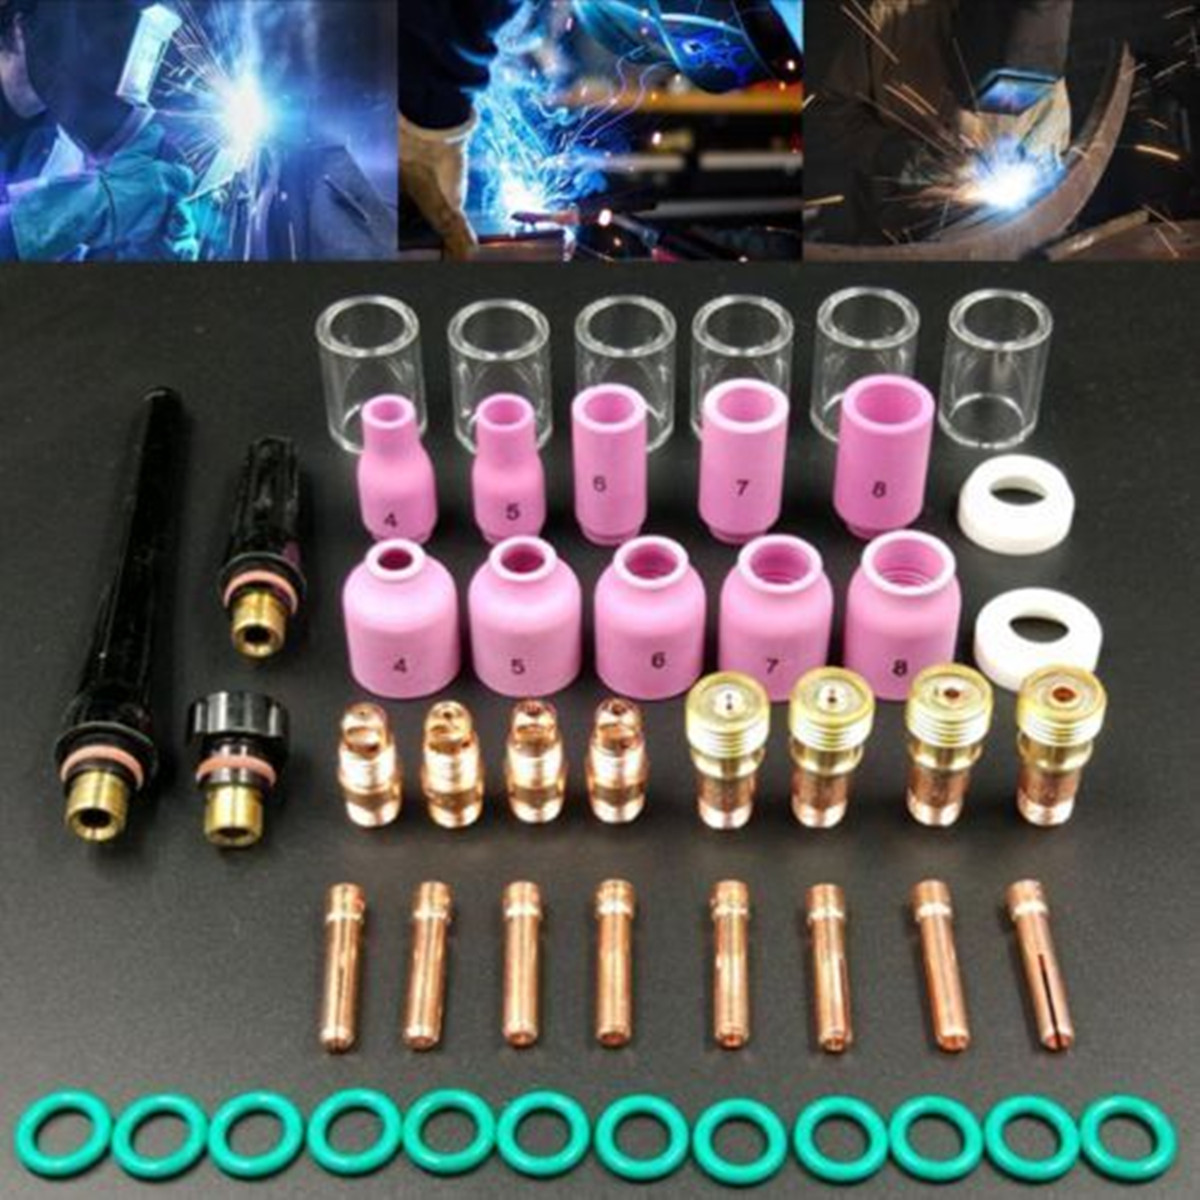 9 Pcs/Set TIG Welding Torch Stubby Gas Glass Lens Kits Supplies For WP-17/18/26 